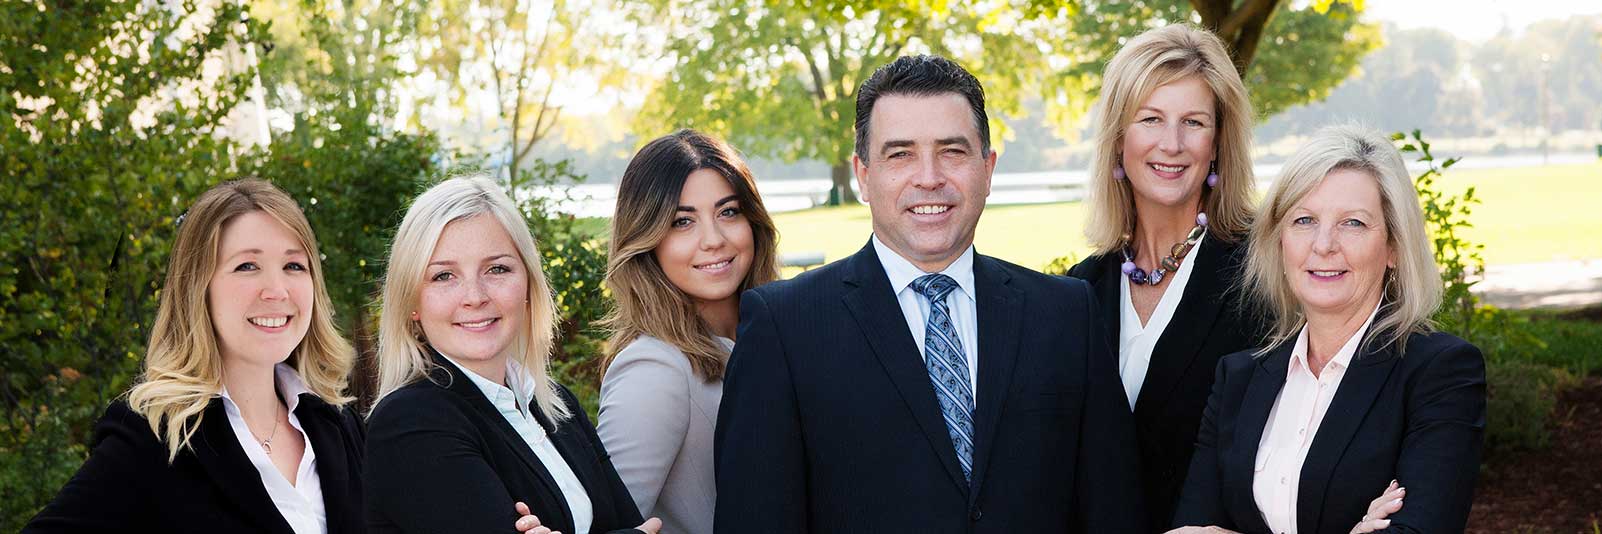 The Pyle Group - Scotia Wealth Management Peterborough